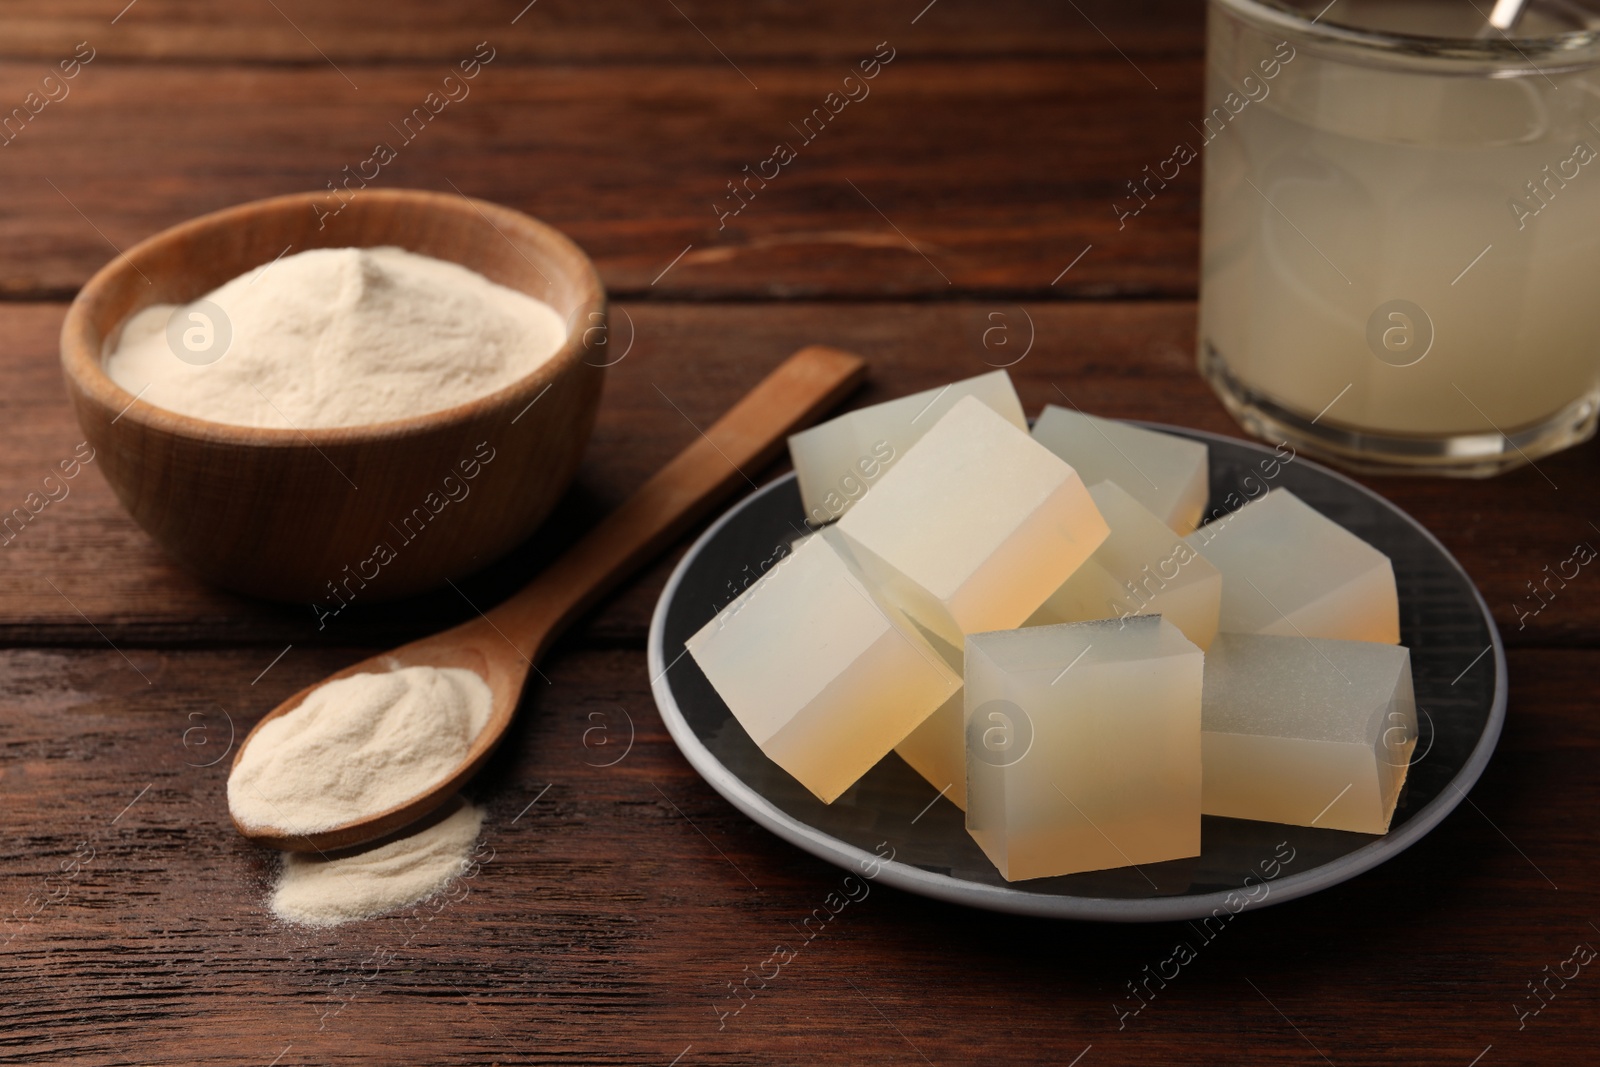 Photo of Agar-agar jelly and powder on wooden table